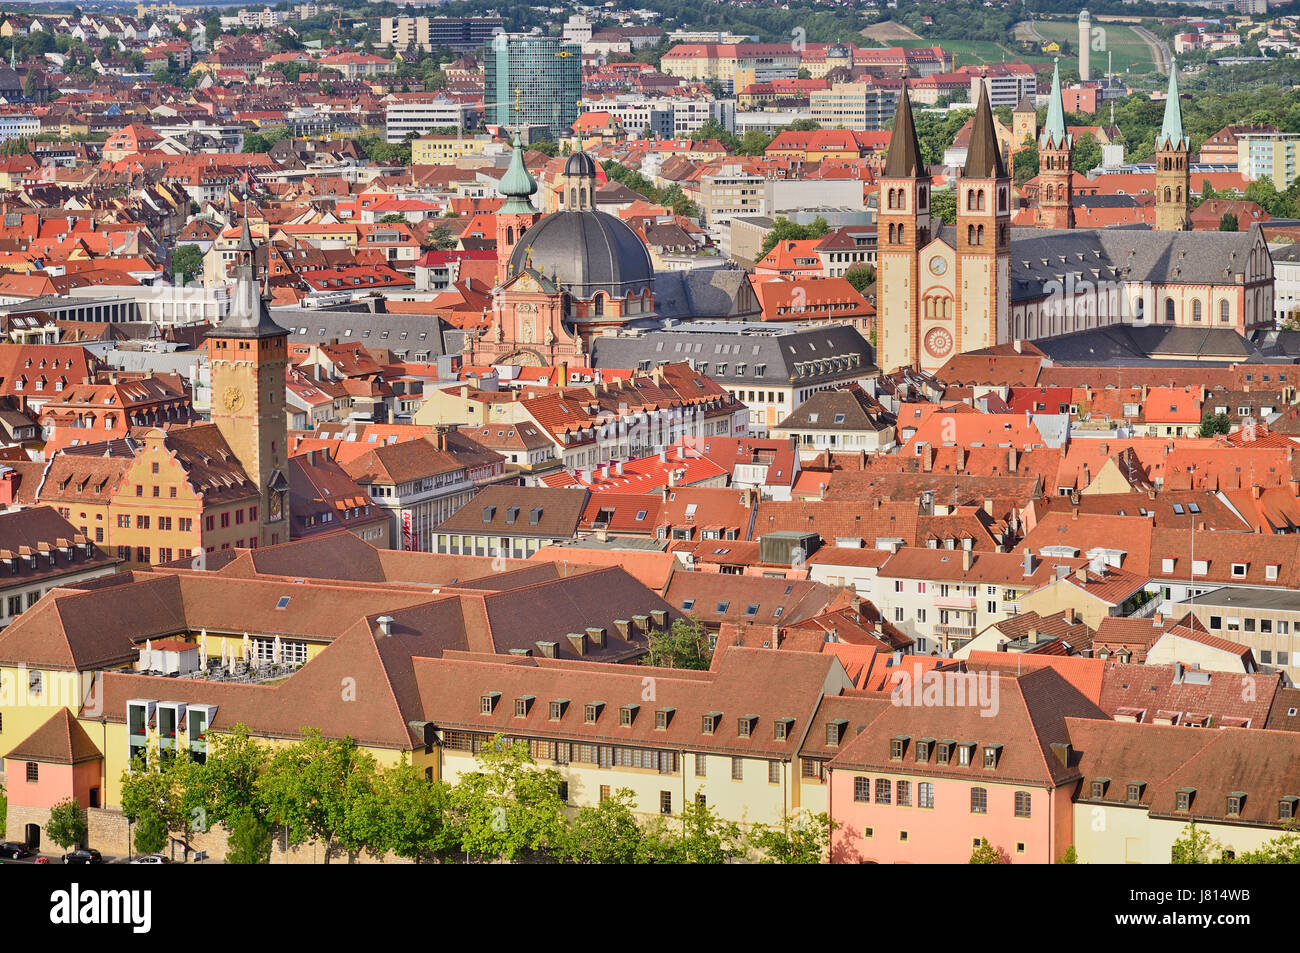 Germany, Bavaria, Wurzburg, View from the Festung Marienberg Fortress showing the  Alstadt or Old Town with the Town Hall Neumunster and Cathedral of  Stock Photo